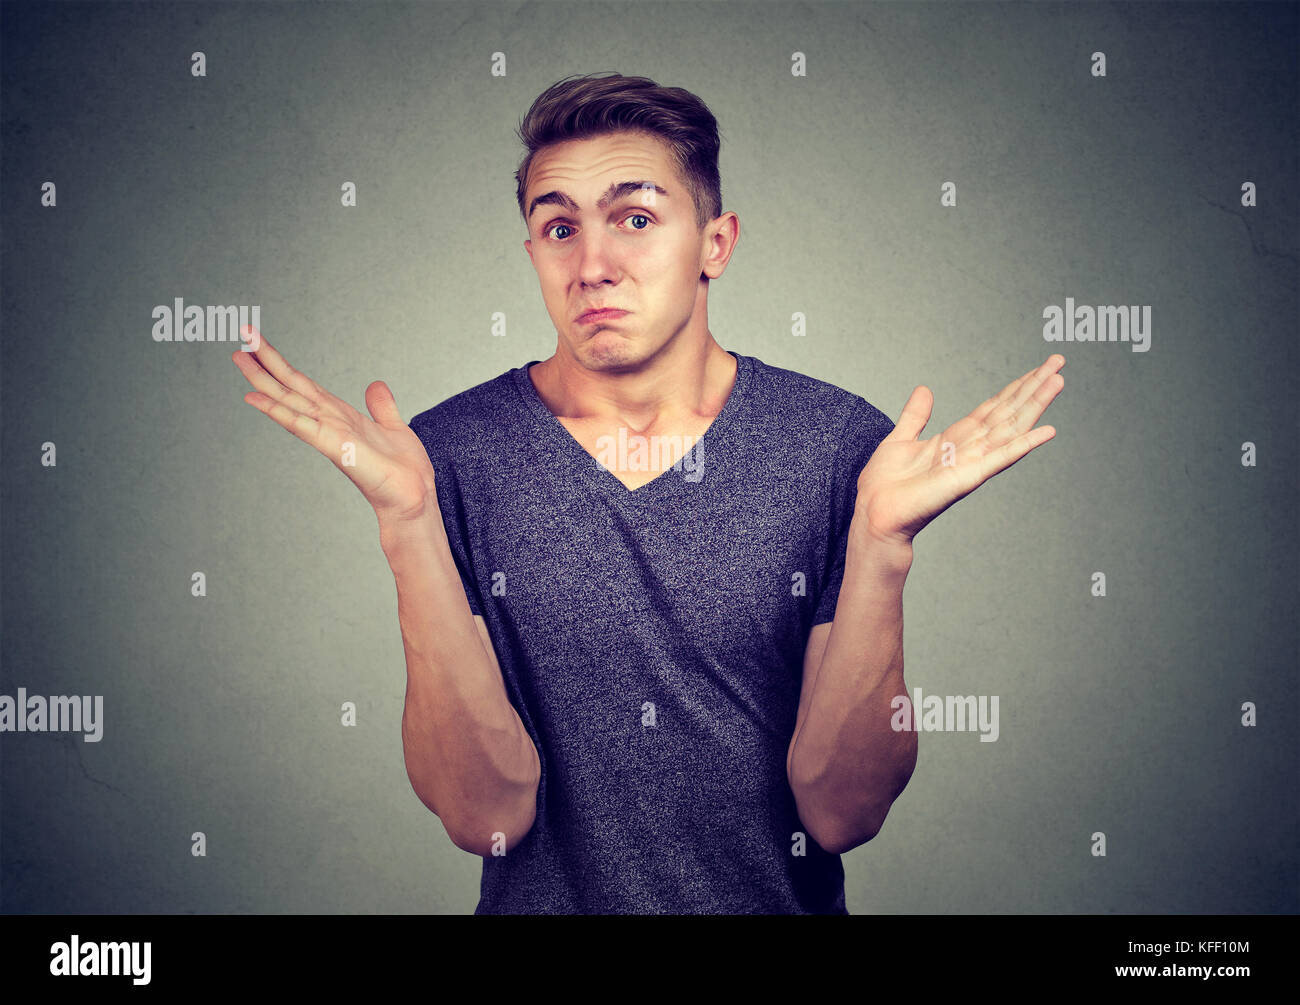 Closeup portrait young man shrugging shoulders isolated on gray wall background. Body language Stock Photo